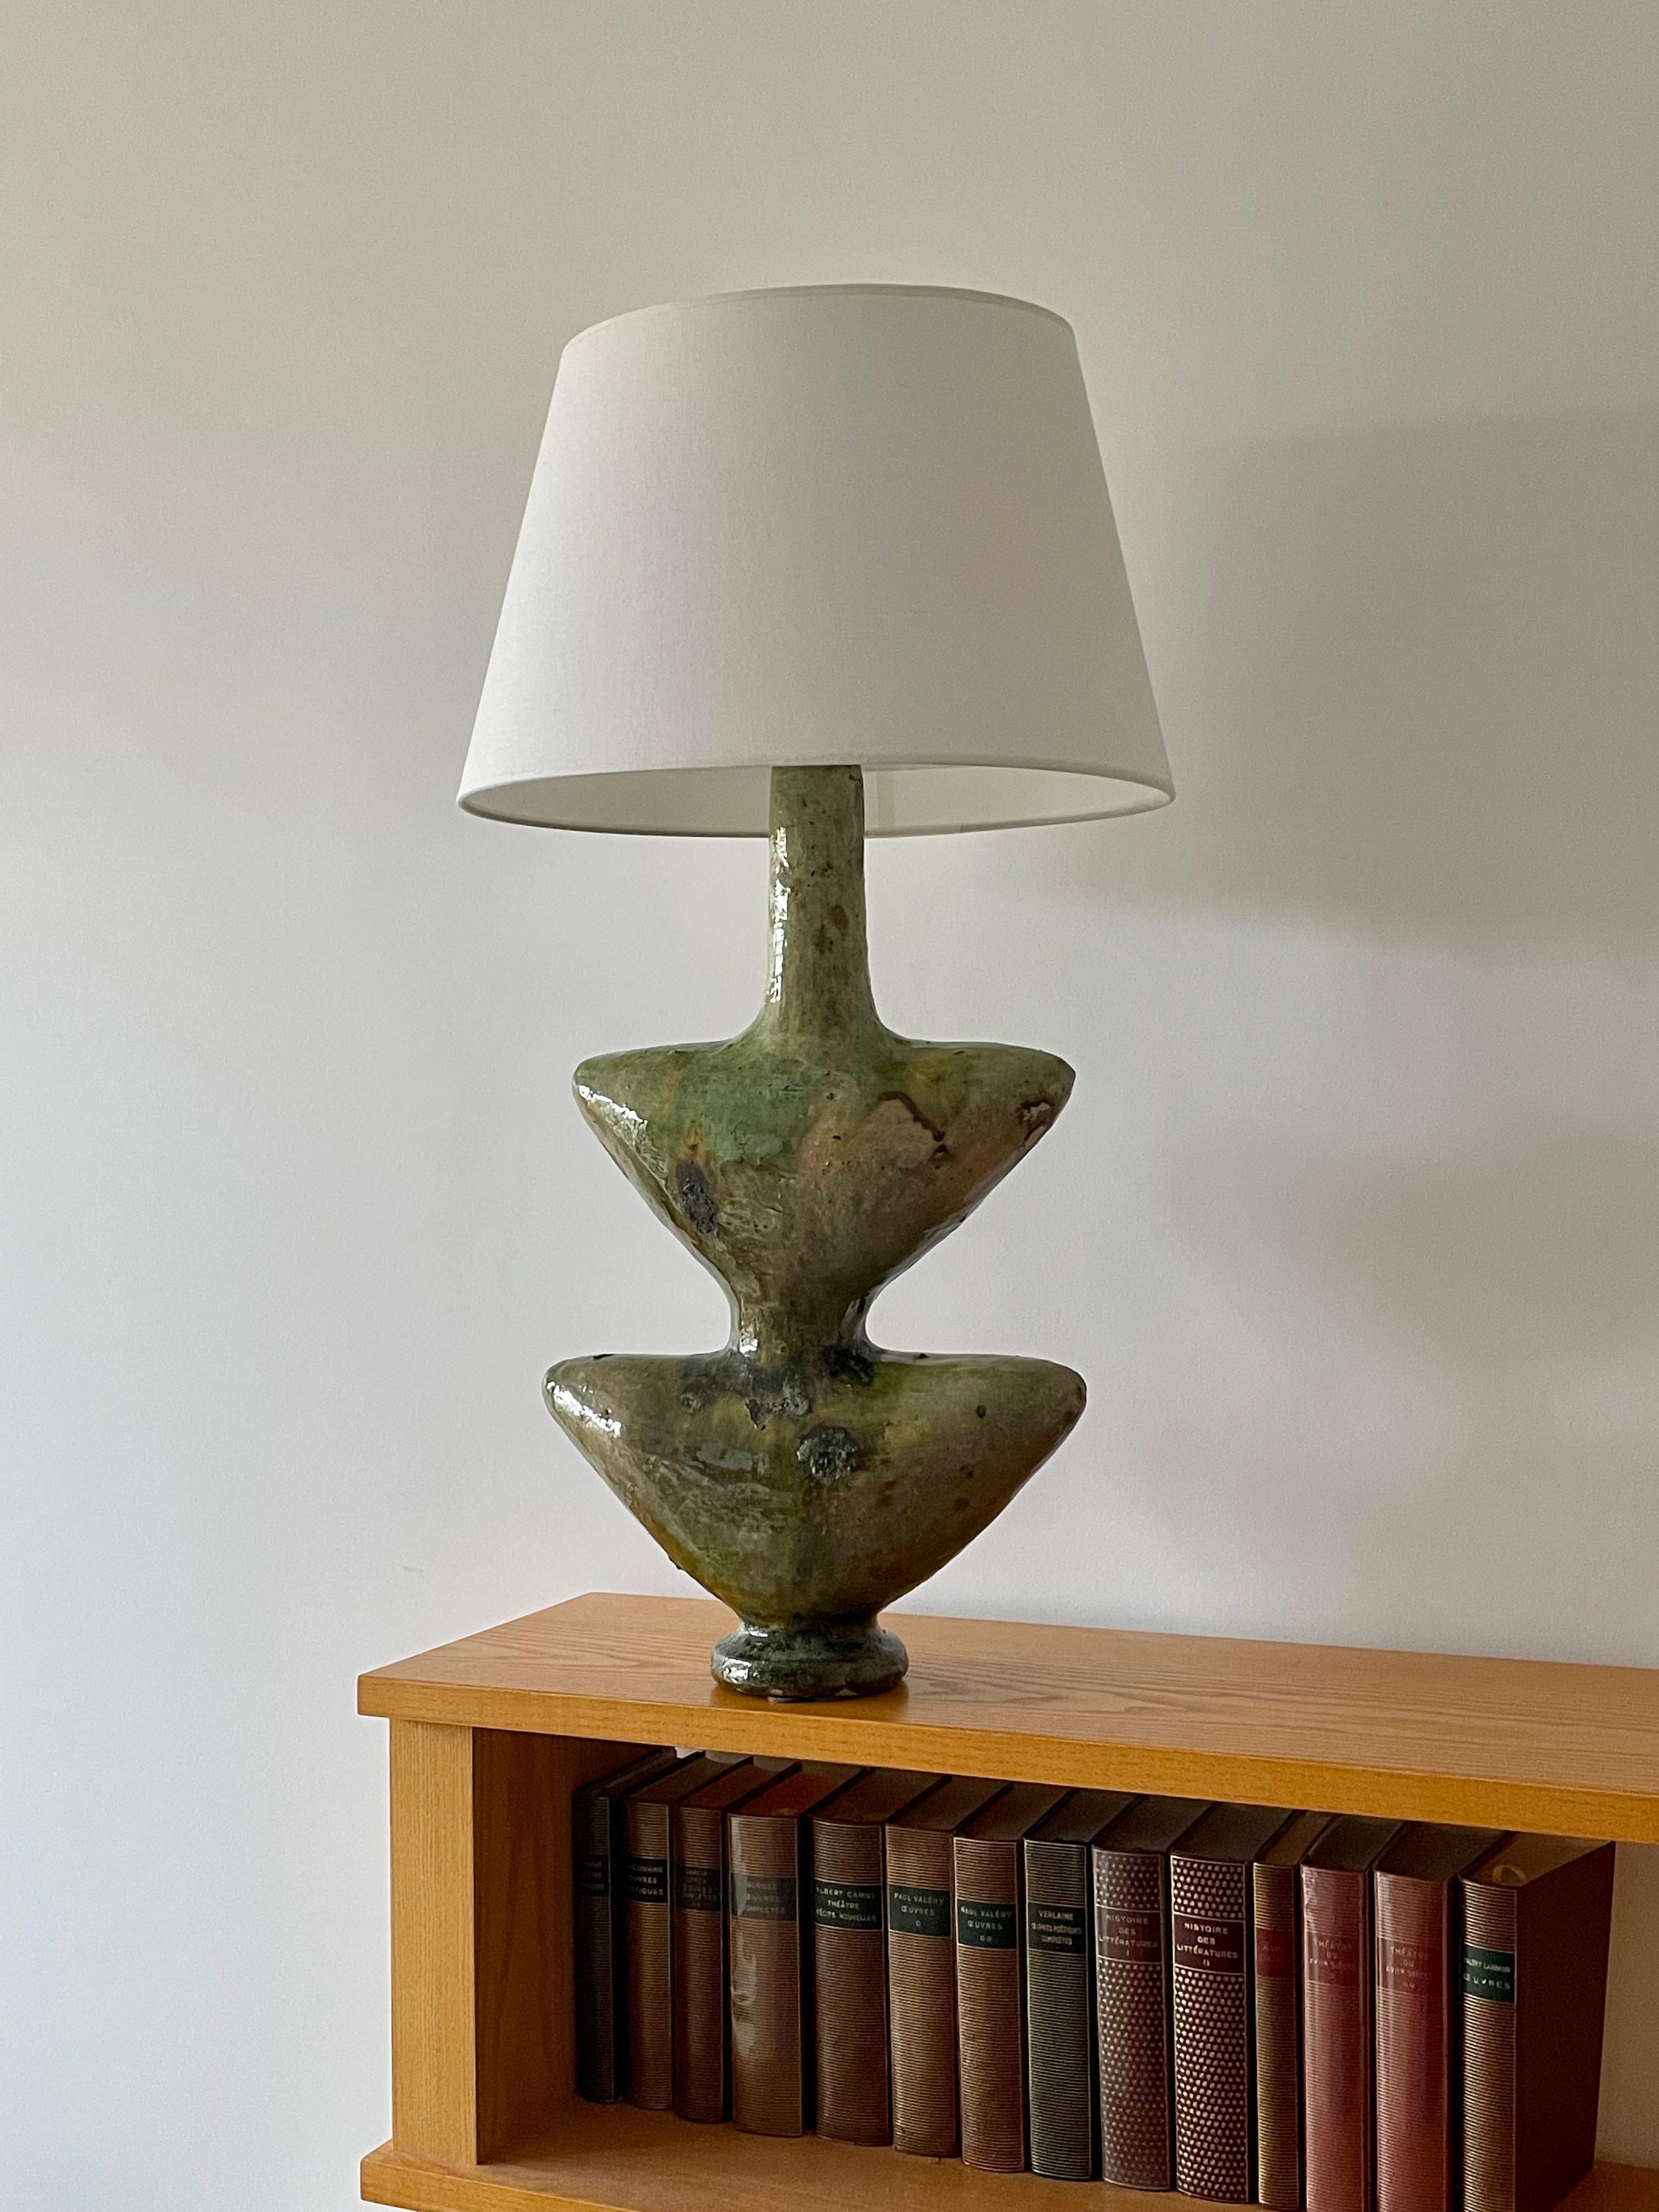 Moroccan Tamegroute Ceramic Lamp 3 In Good Condition For Sale In Saint ouen, FR